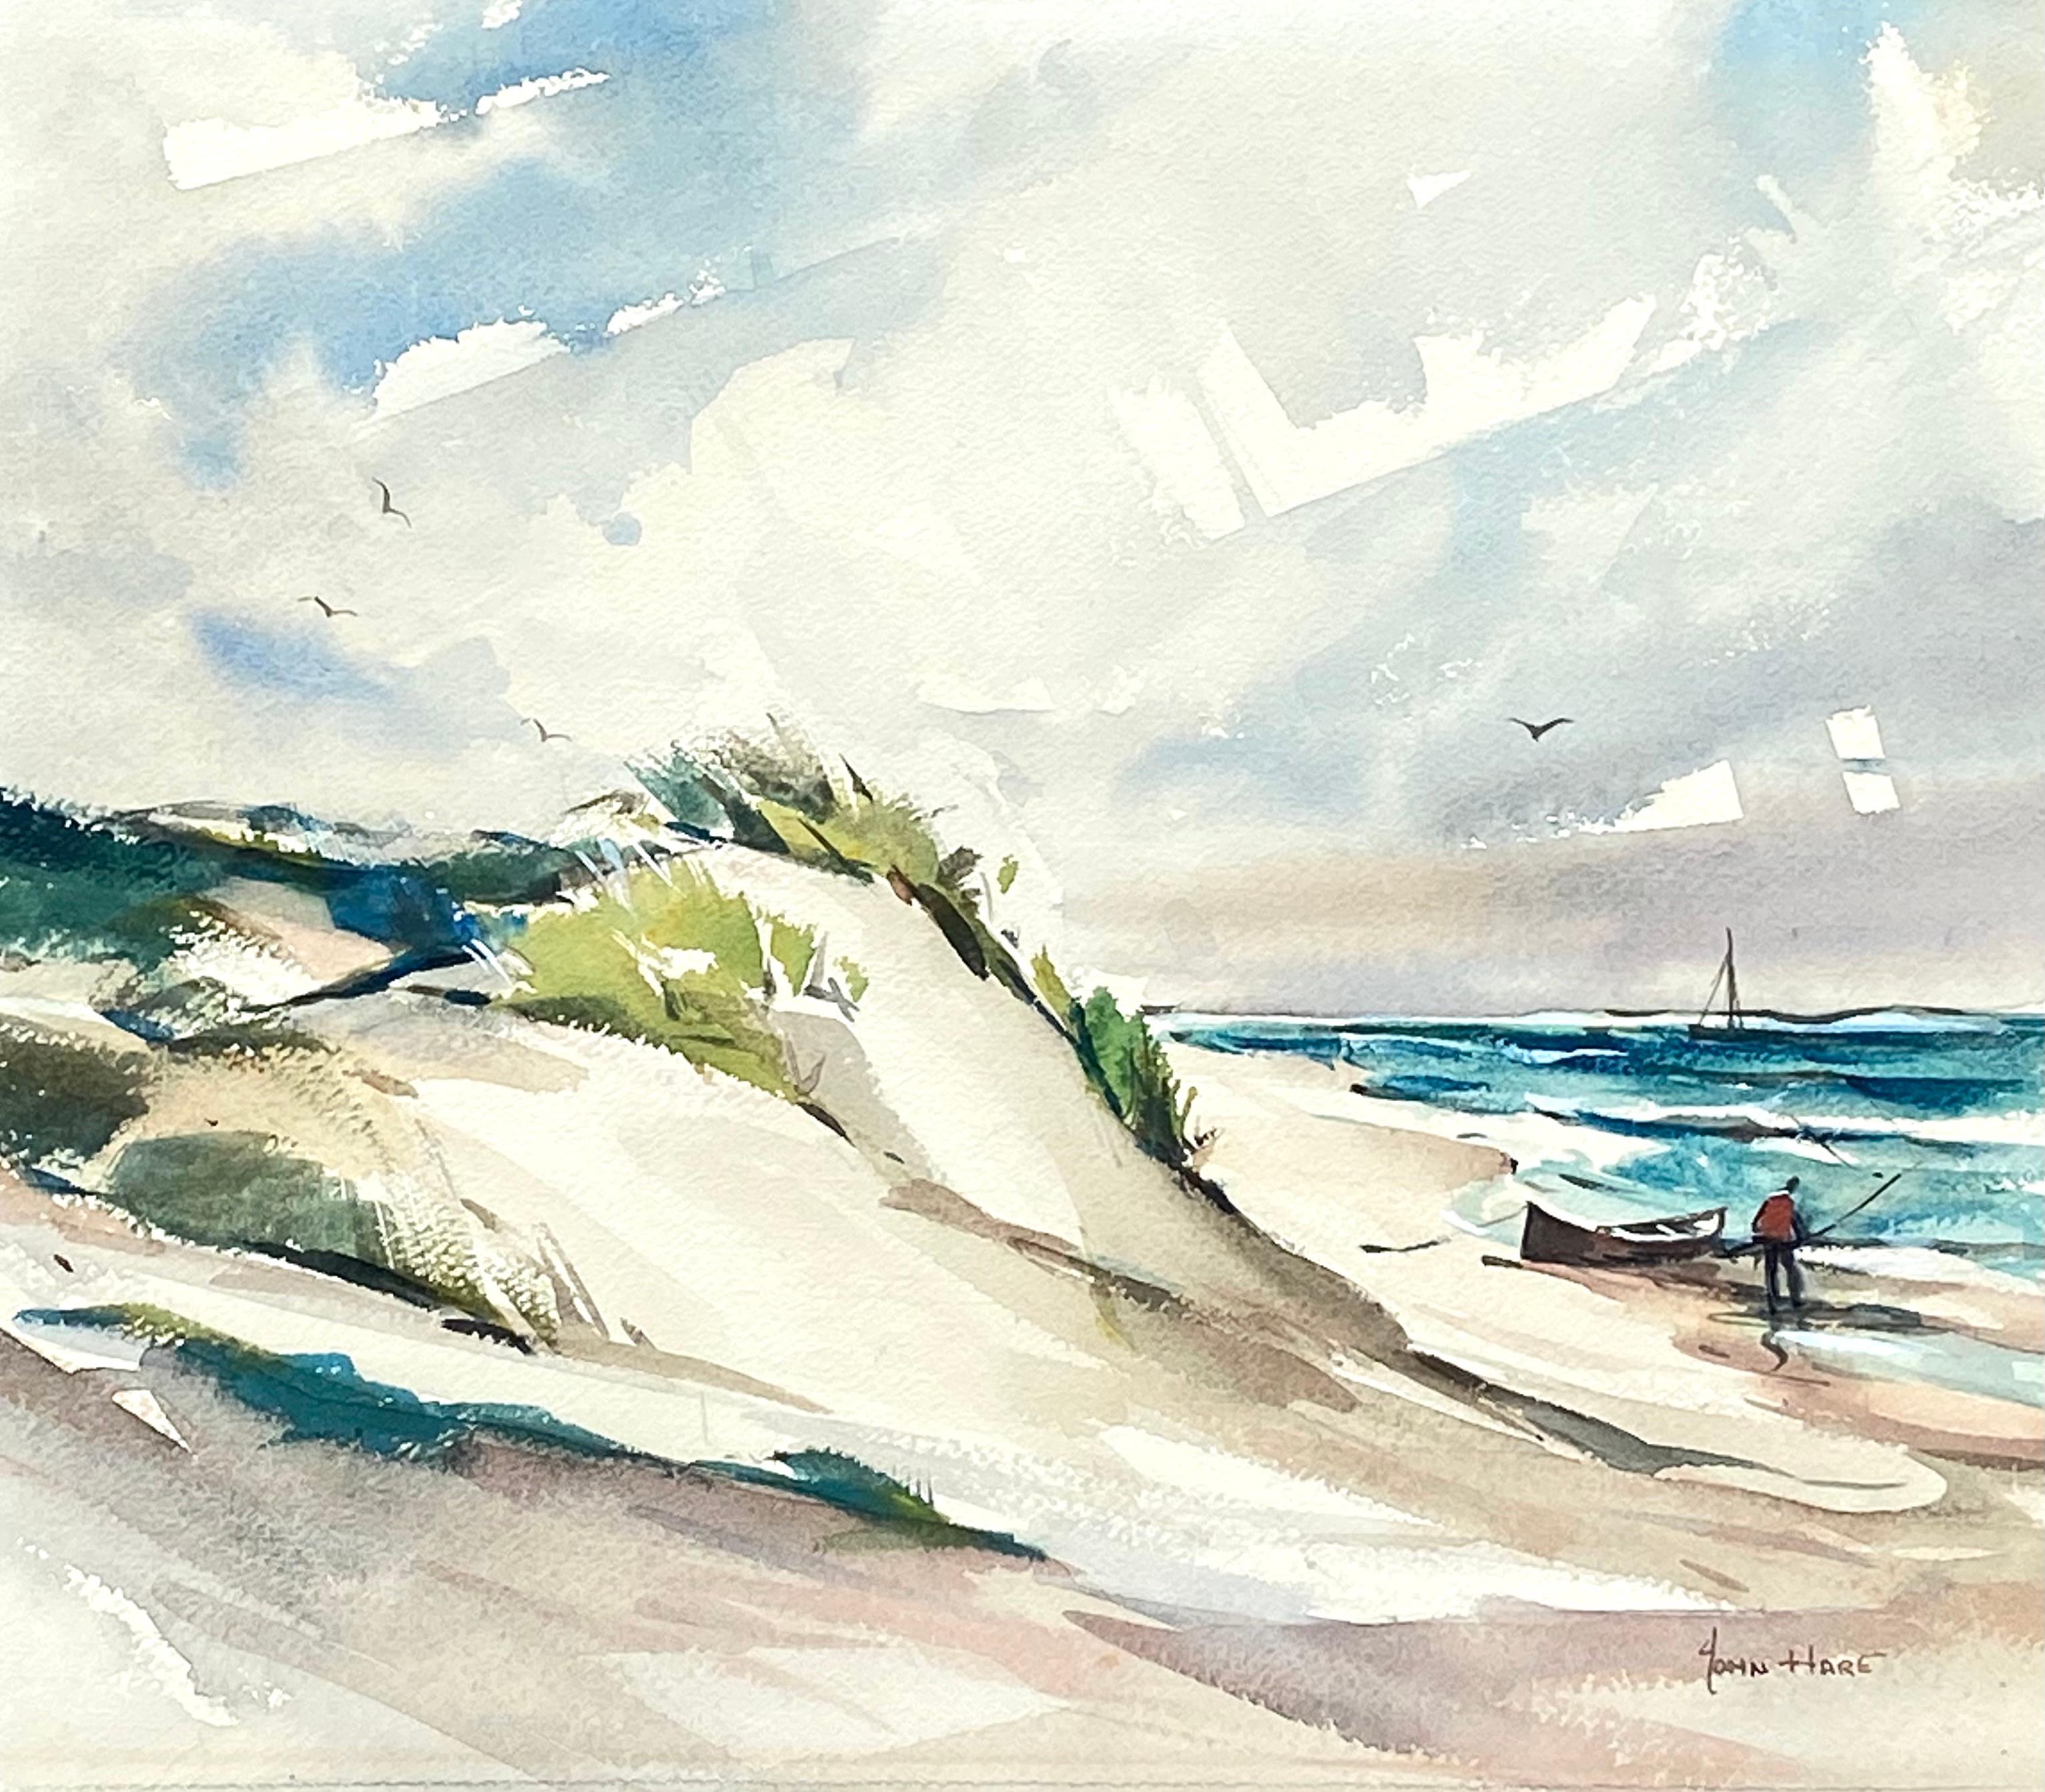 Here for your consideration is a very finely executed watercolor by the New England artist, John Cuthbert Hare of the dunes of Cape Cod, Massachusetts. Condition is excellent. Signed by the artist lower right. Circa 1960. Professionally matted.